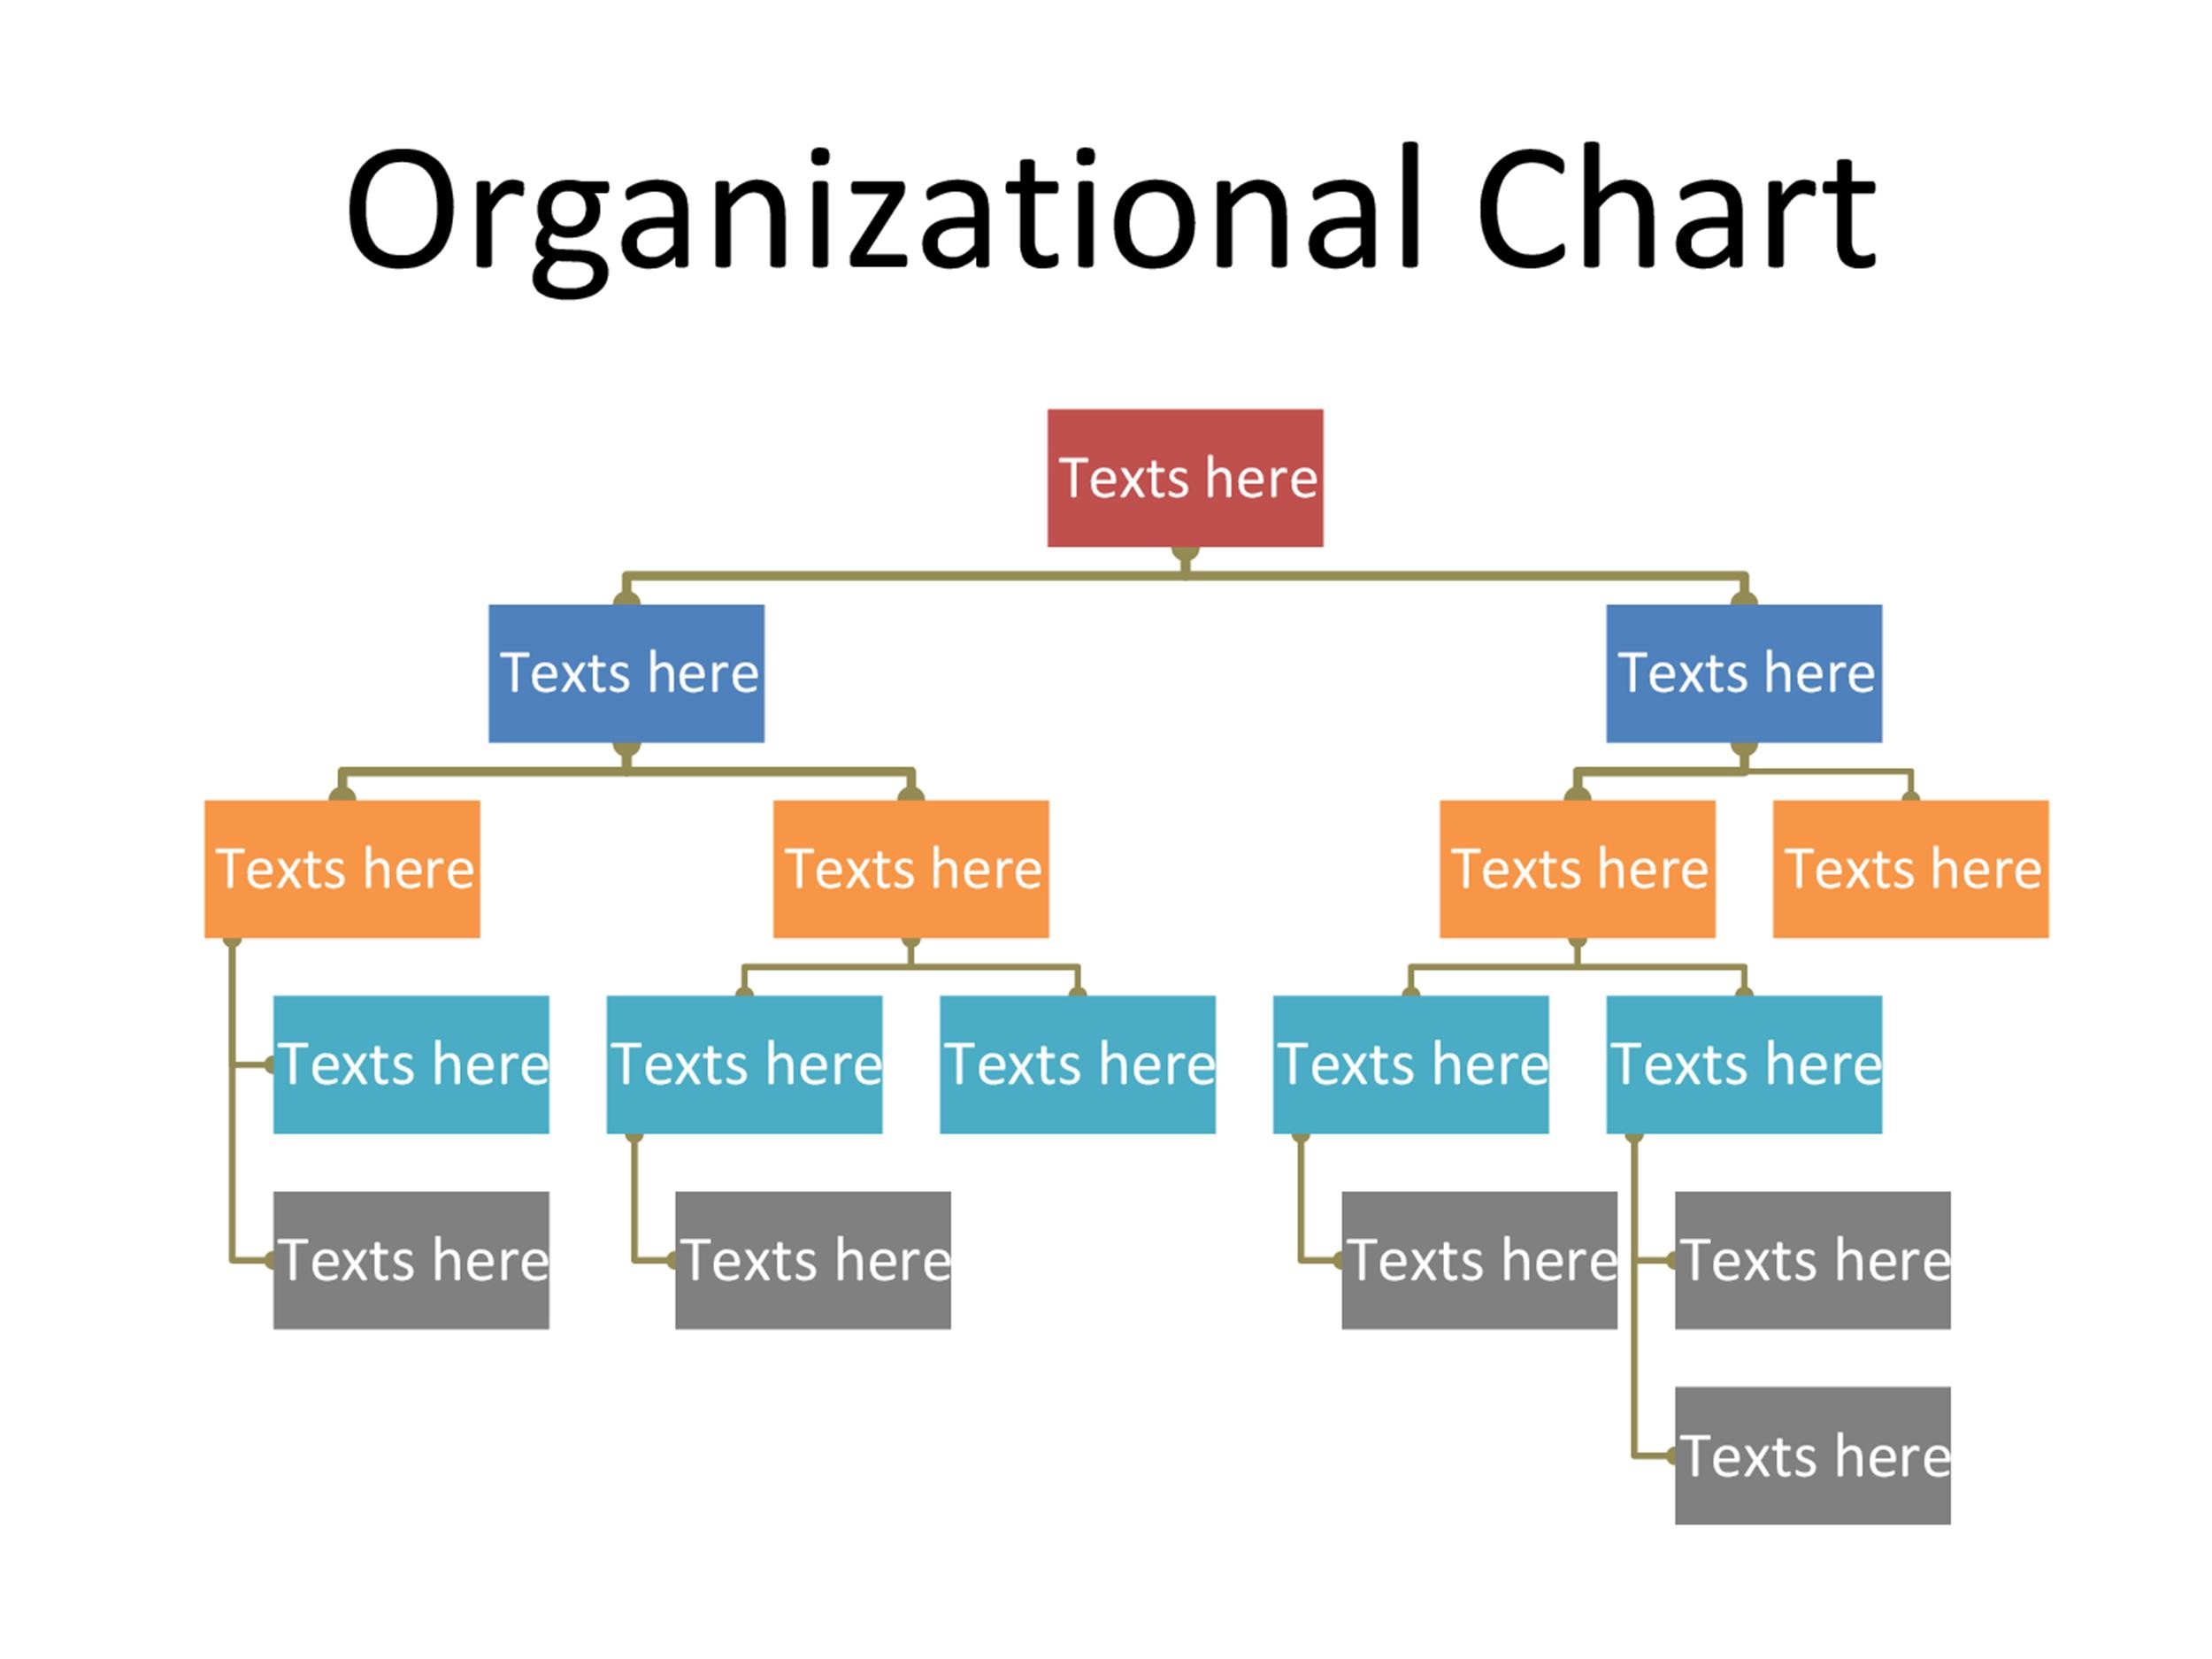 41 Organizational Chart Templates (Word, Excel, PowerPoint ...